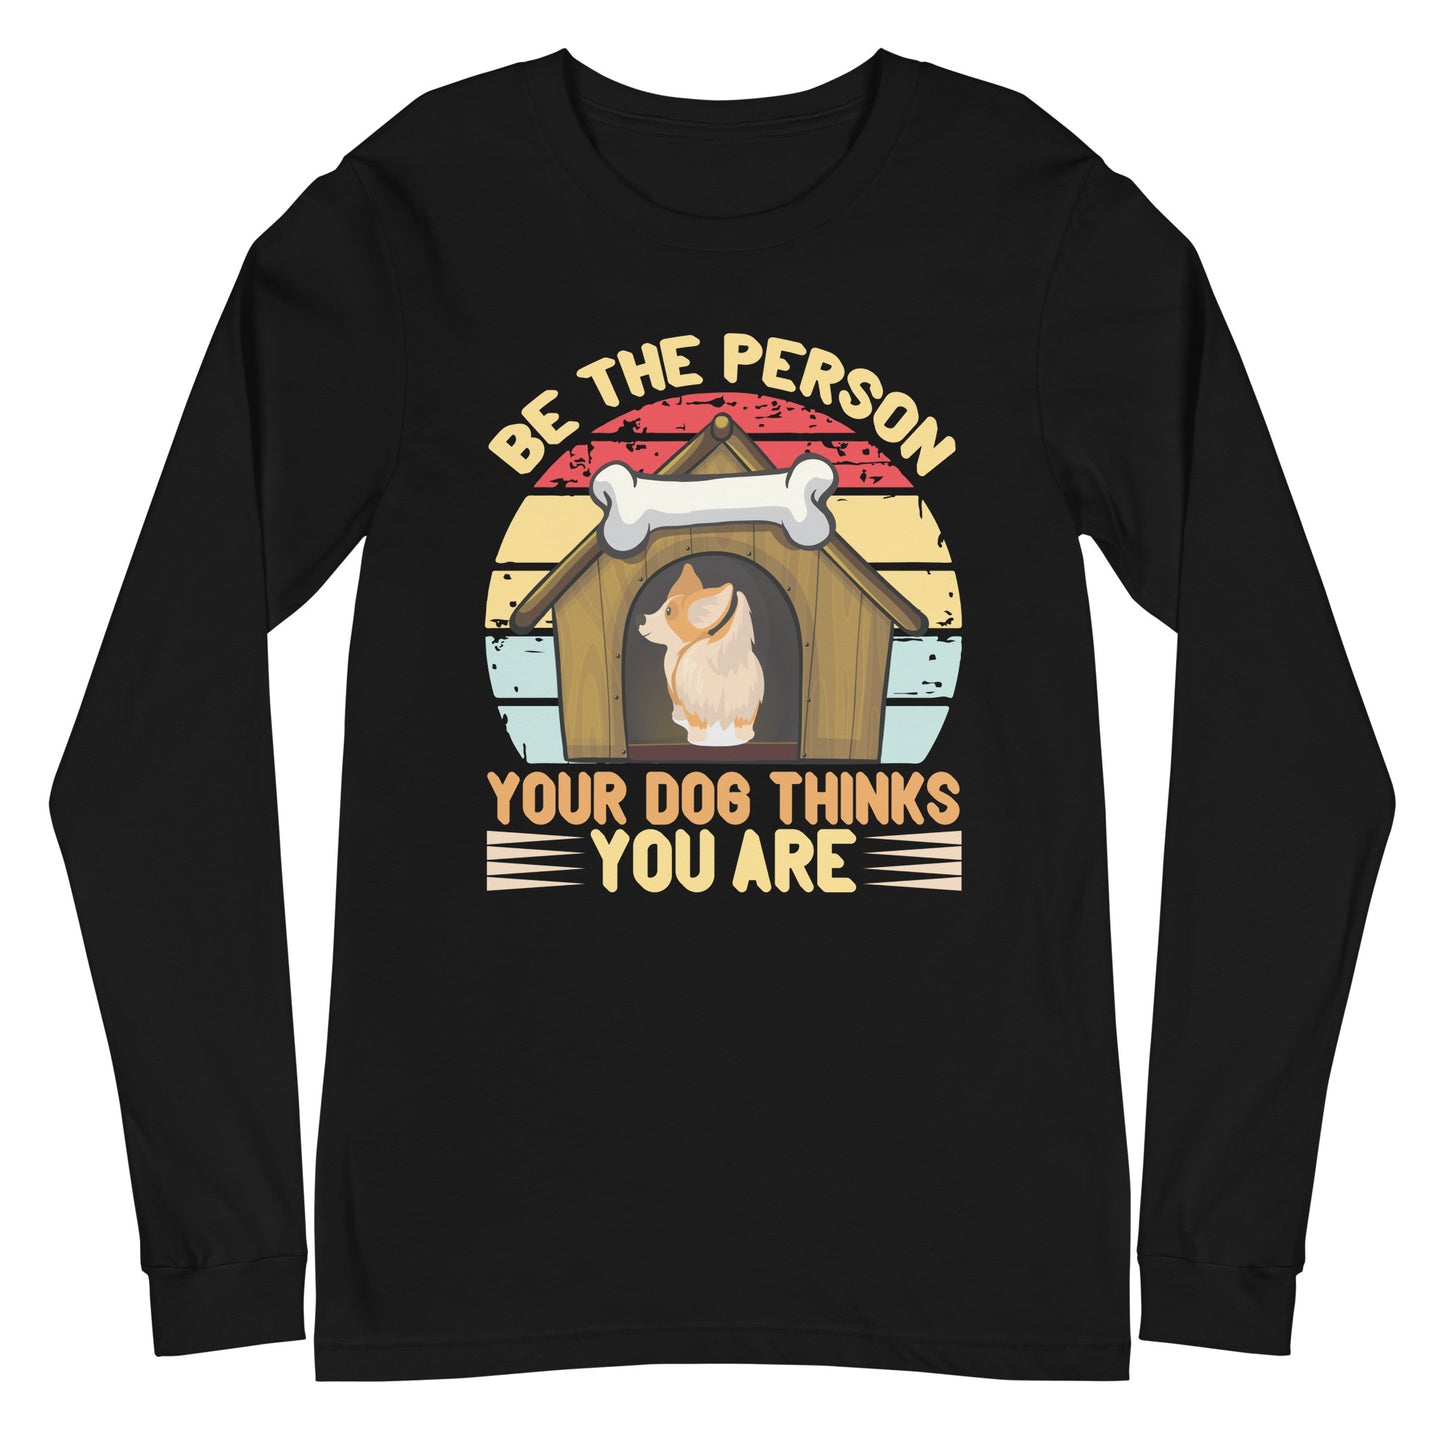 Be The Person Your Dog Thinks You Are Long Sleeve Tee